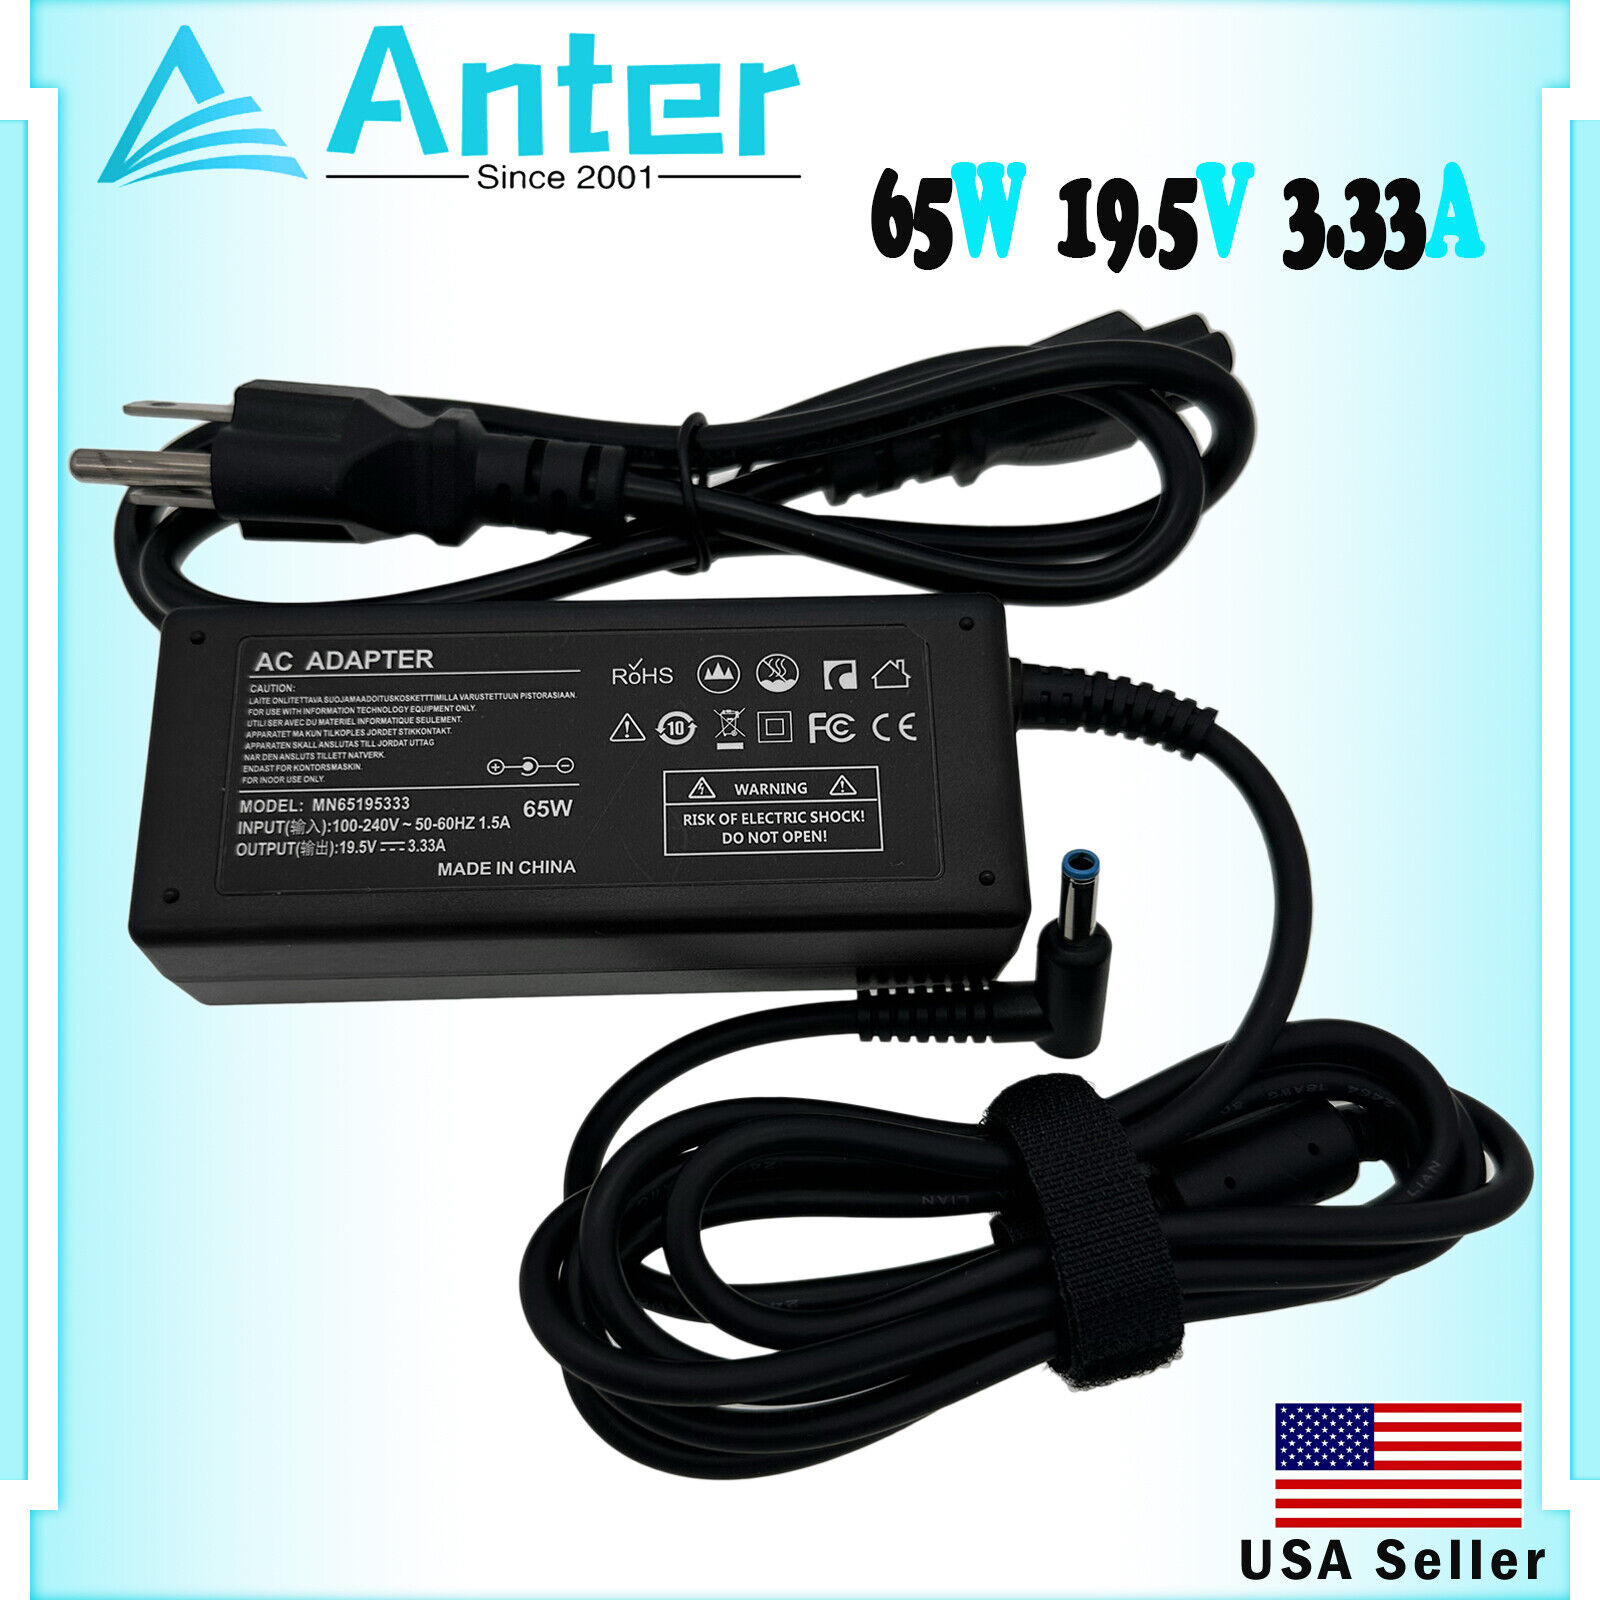 AC Adapter For HP 15-gw0010wm 15-gw0023od 15-gw0035dx Laptop Charger Power Cord